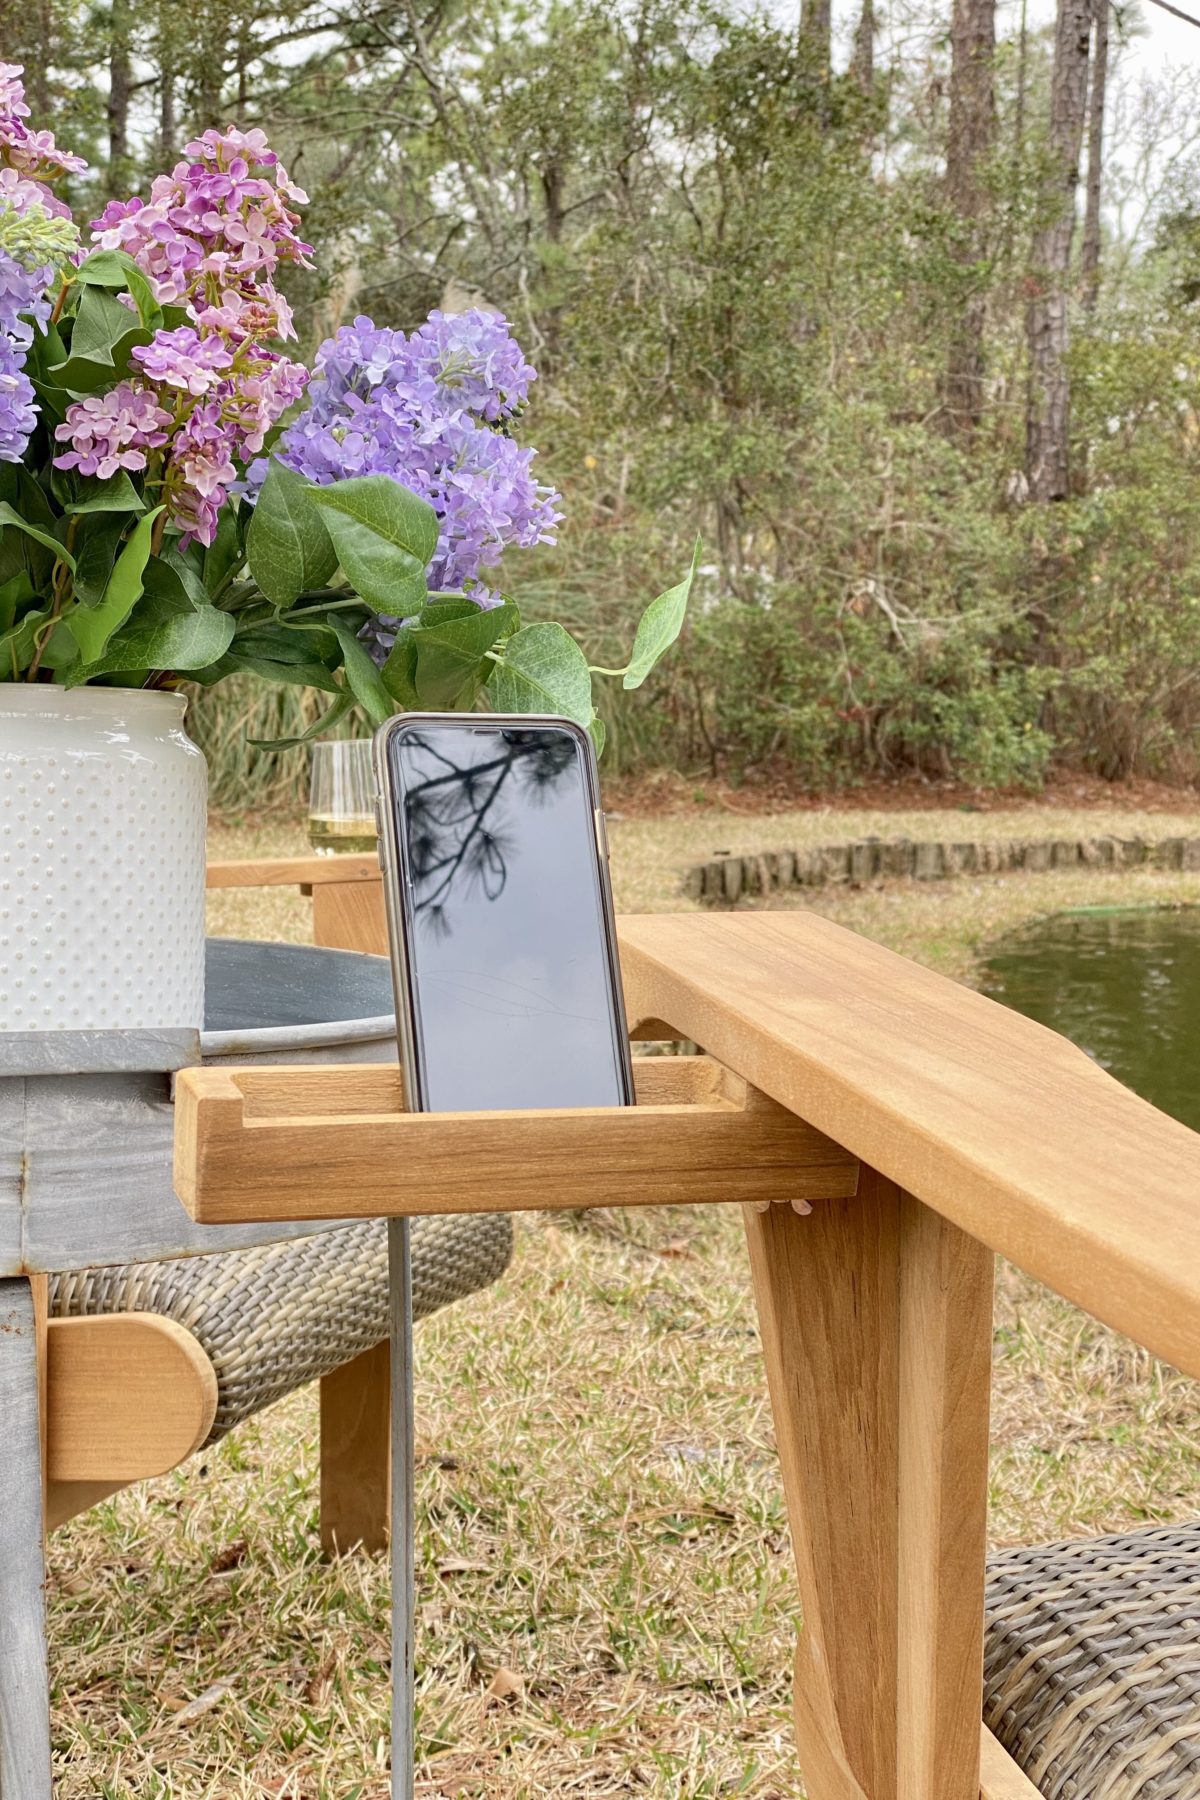 A cell phone in the phone grabber attachment to the arm of the Adirondack chair. The pond is in the background.